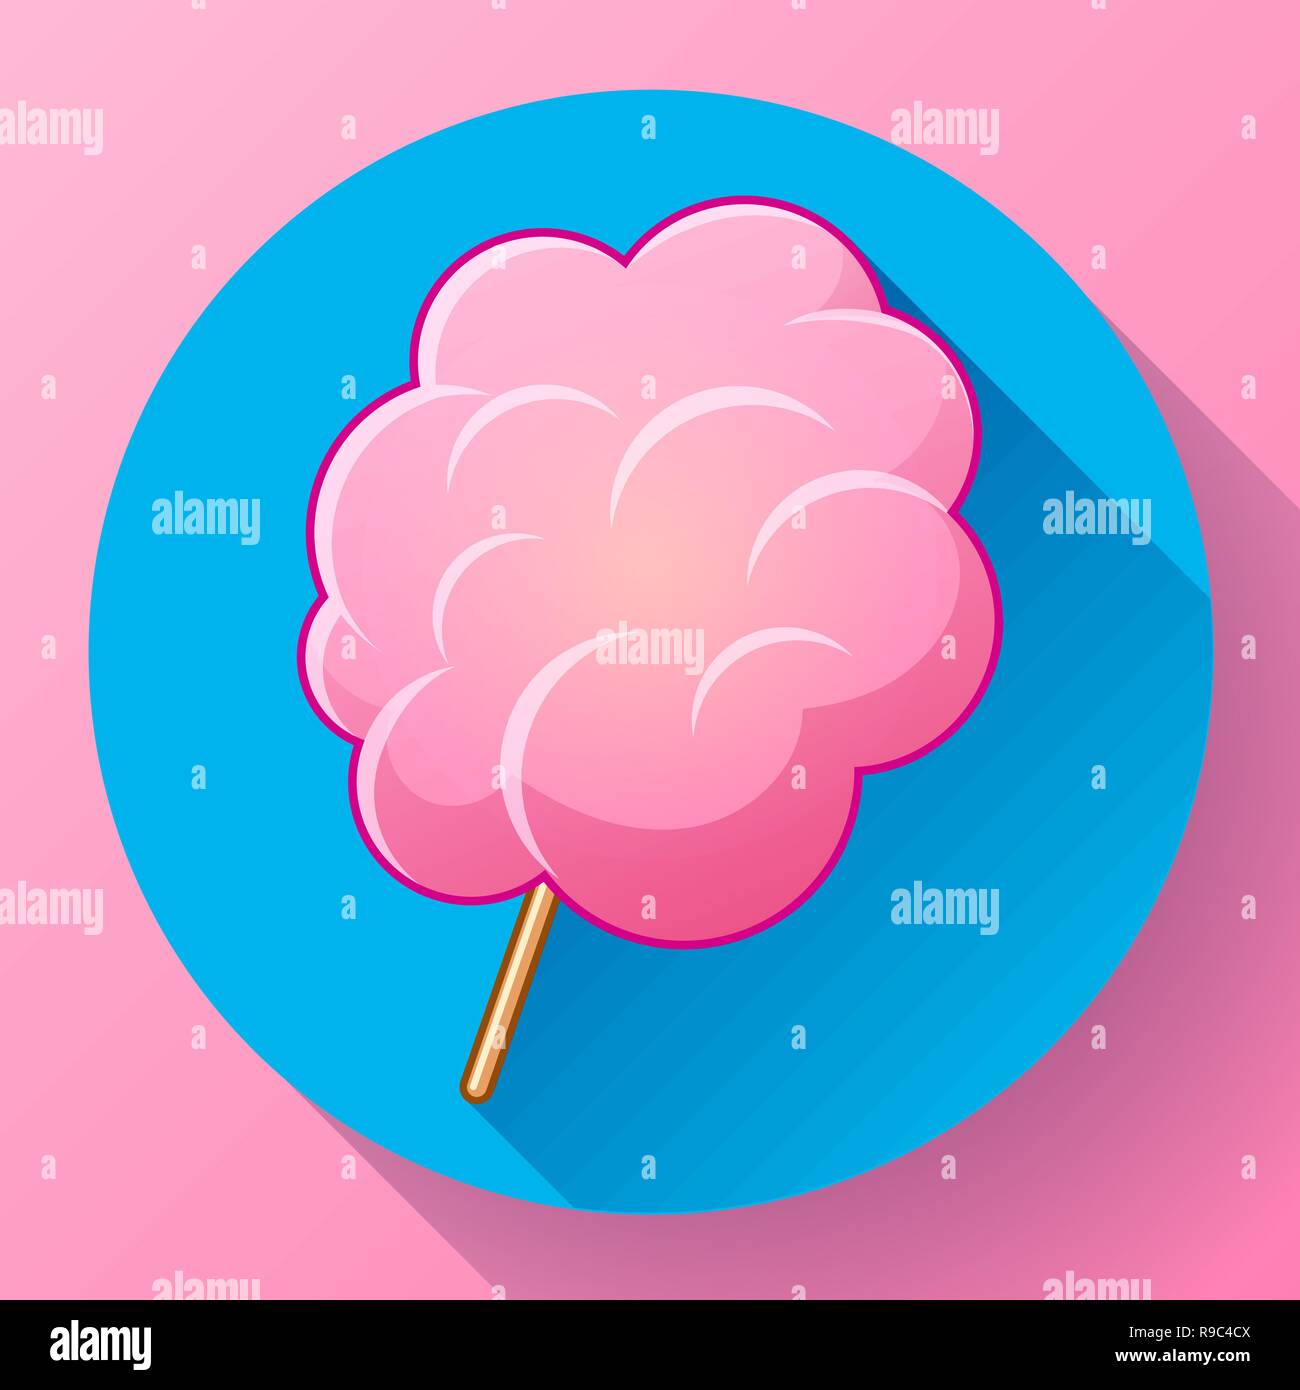 Icon of cotton candy, sugar cloud on stick isolated Stock Vector